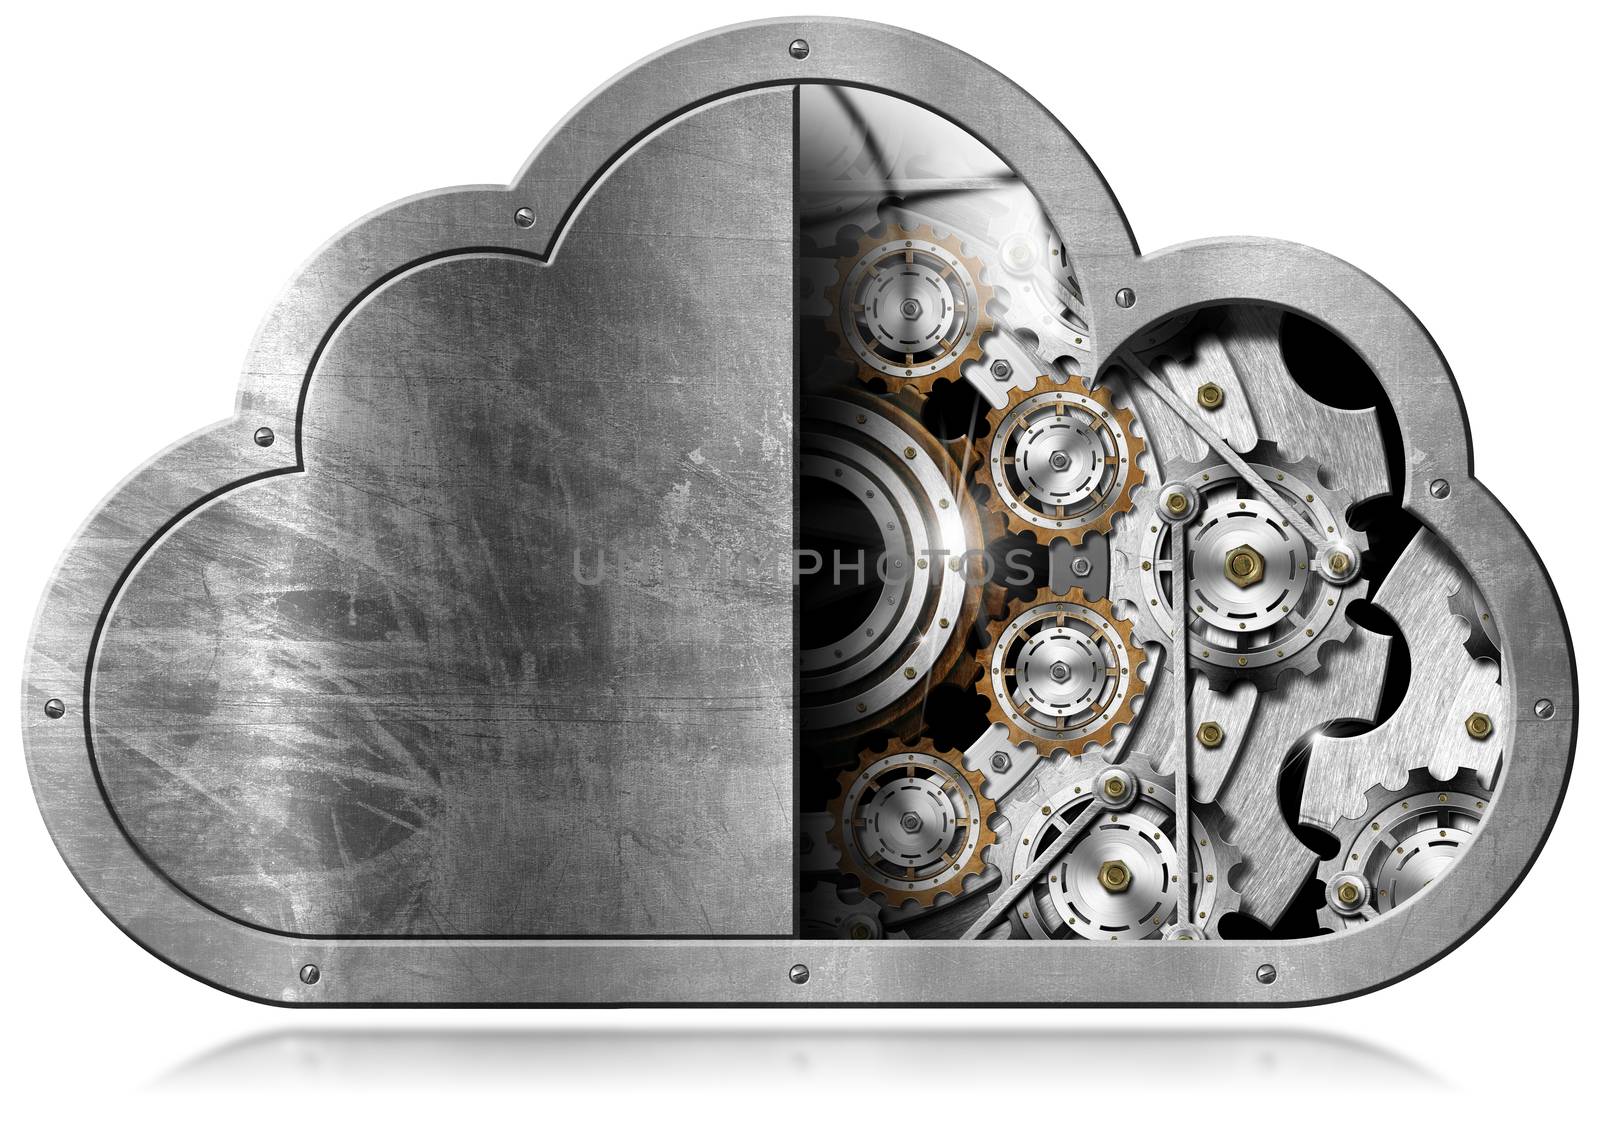 Cloud Computing with Metal Gears by catalby